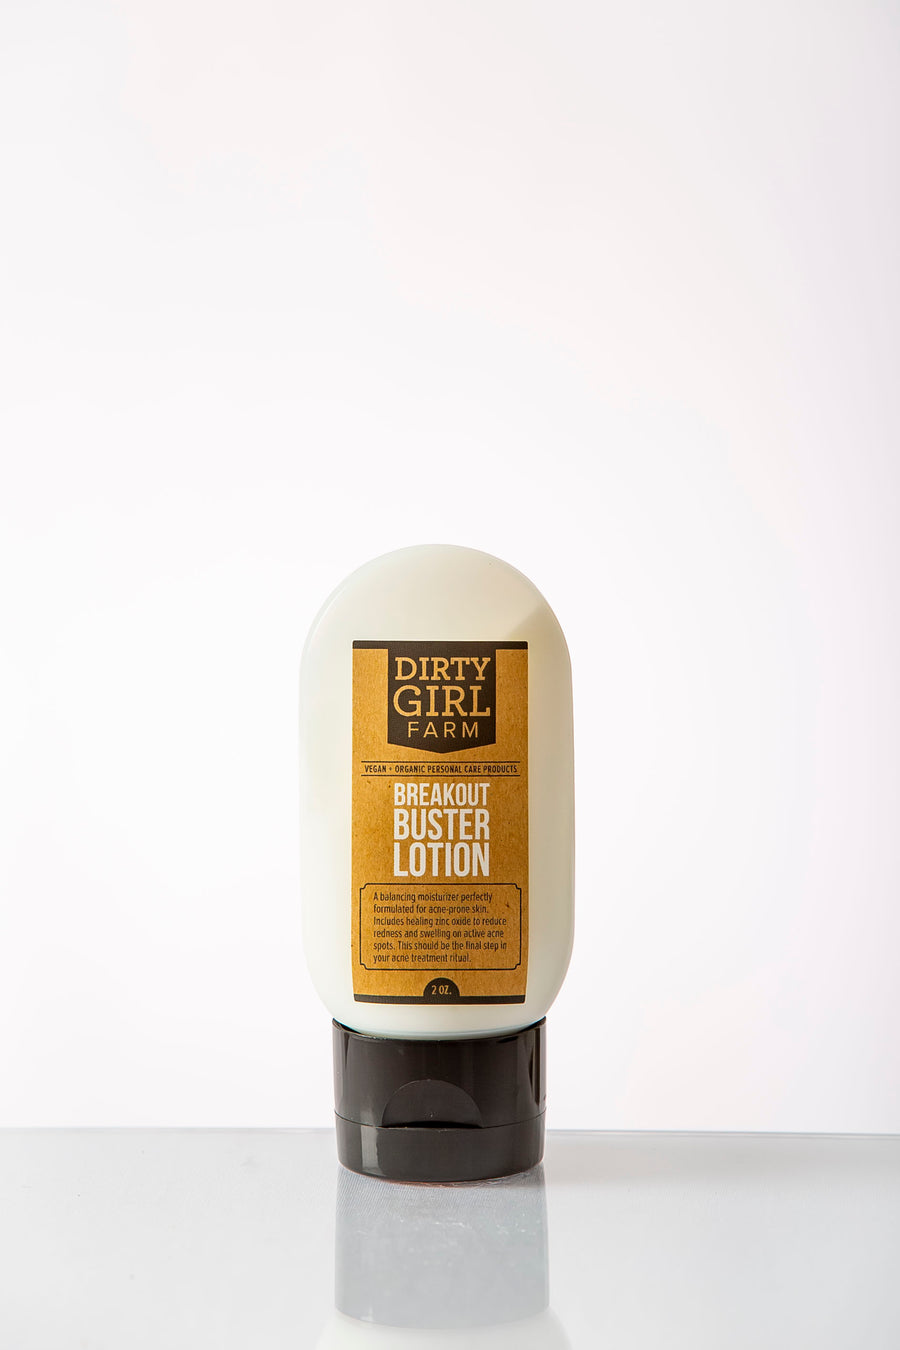 Dirty Girl Farm Breakout Buster Lotion